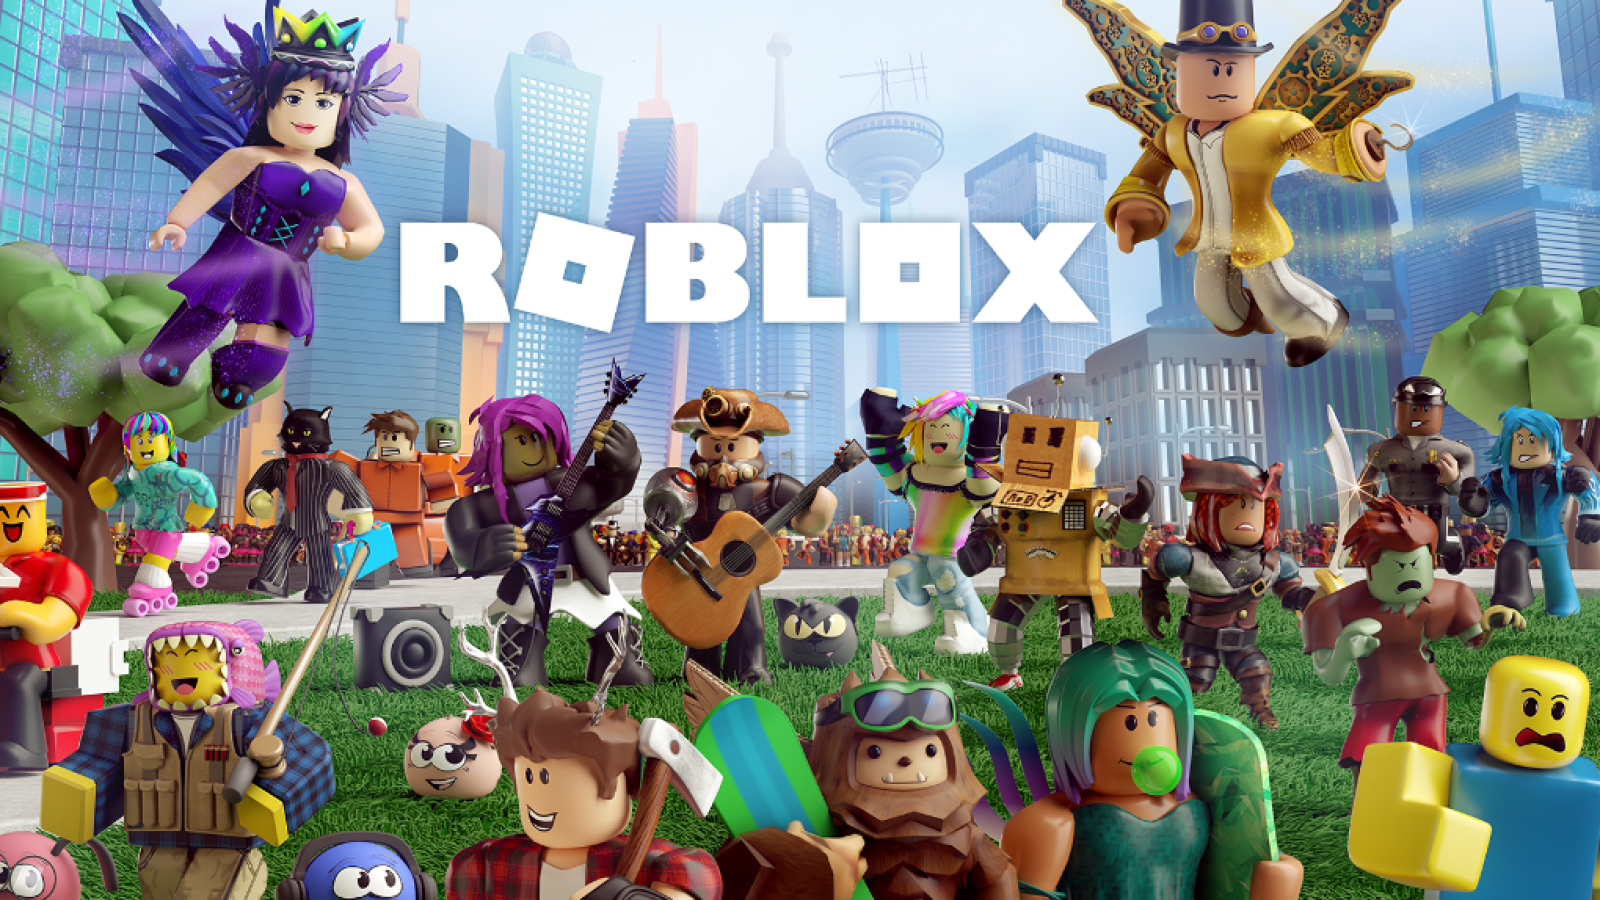 Icamp Online Roblox Classes For Kids - roblox developer course